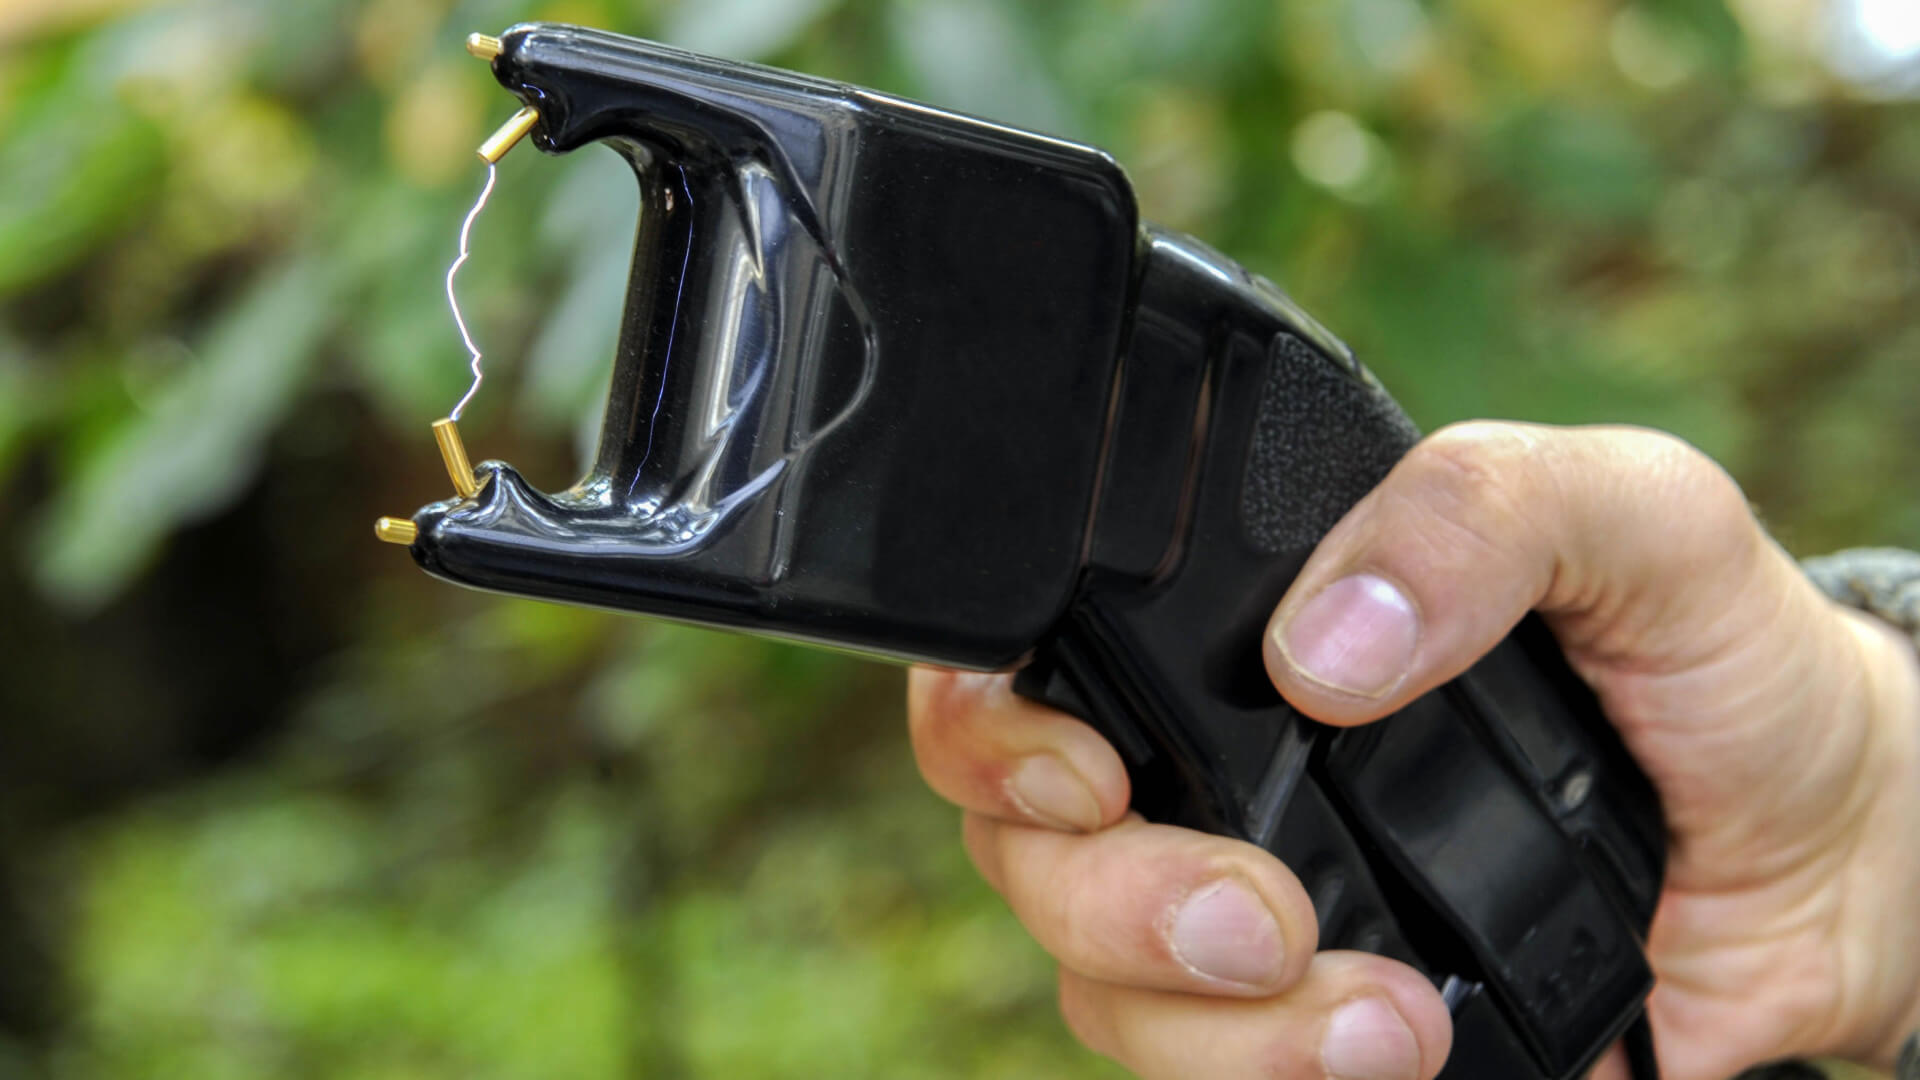 Is it Legal to Use Stun Guns and Tasers in PA?